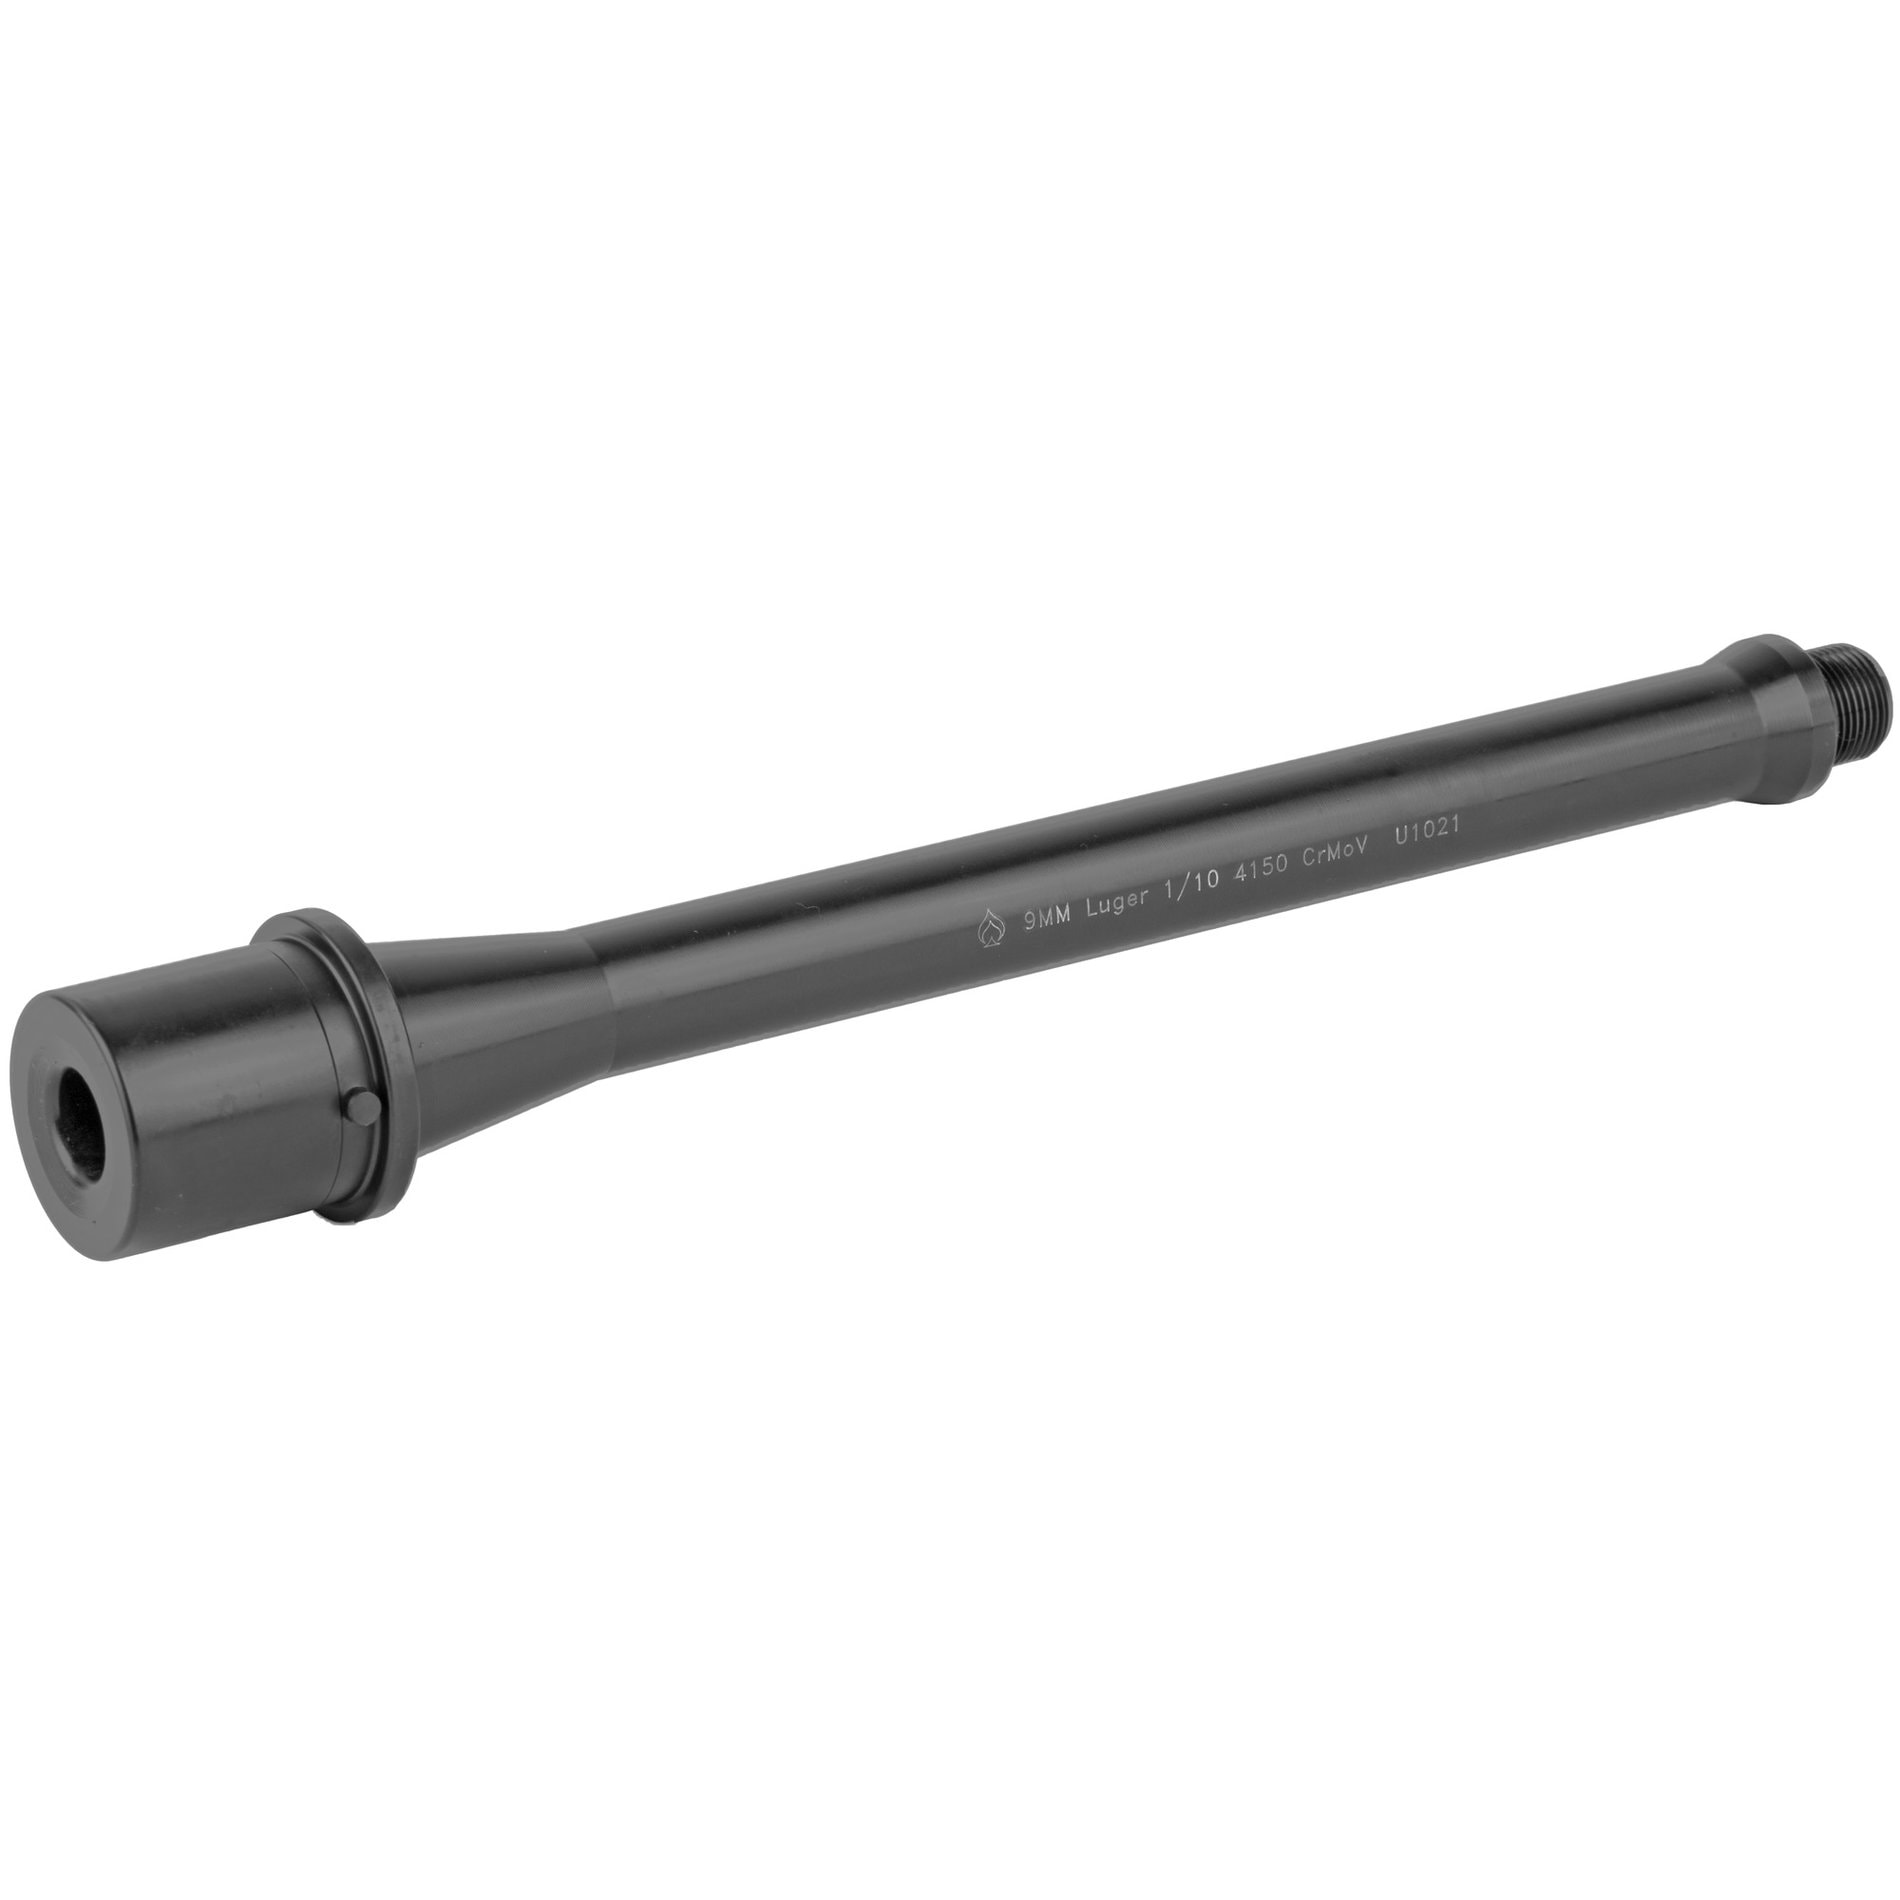 Ballistic Advantage 9mm 8.3 Inch Barrel - Pencil Profile with 1/2x28 Threads - AT3 Tactical